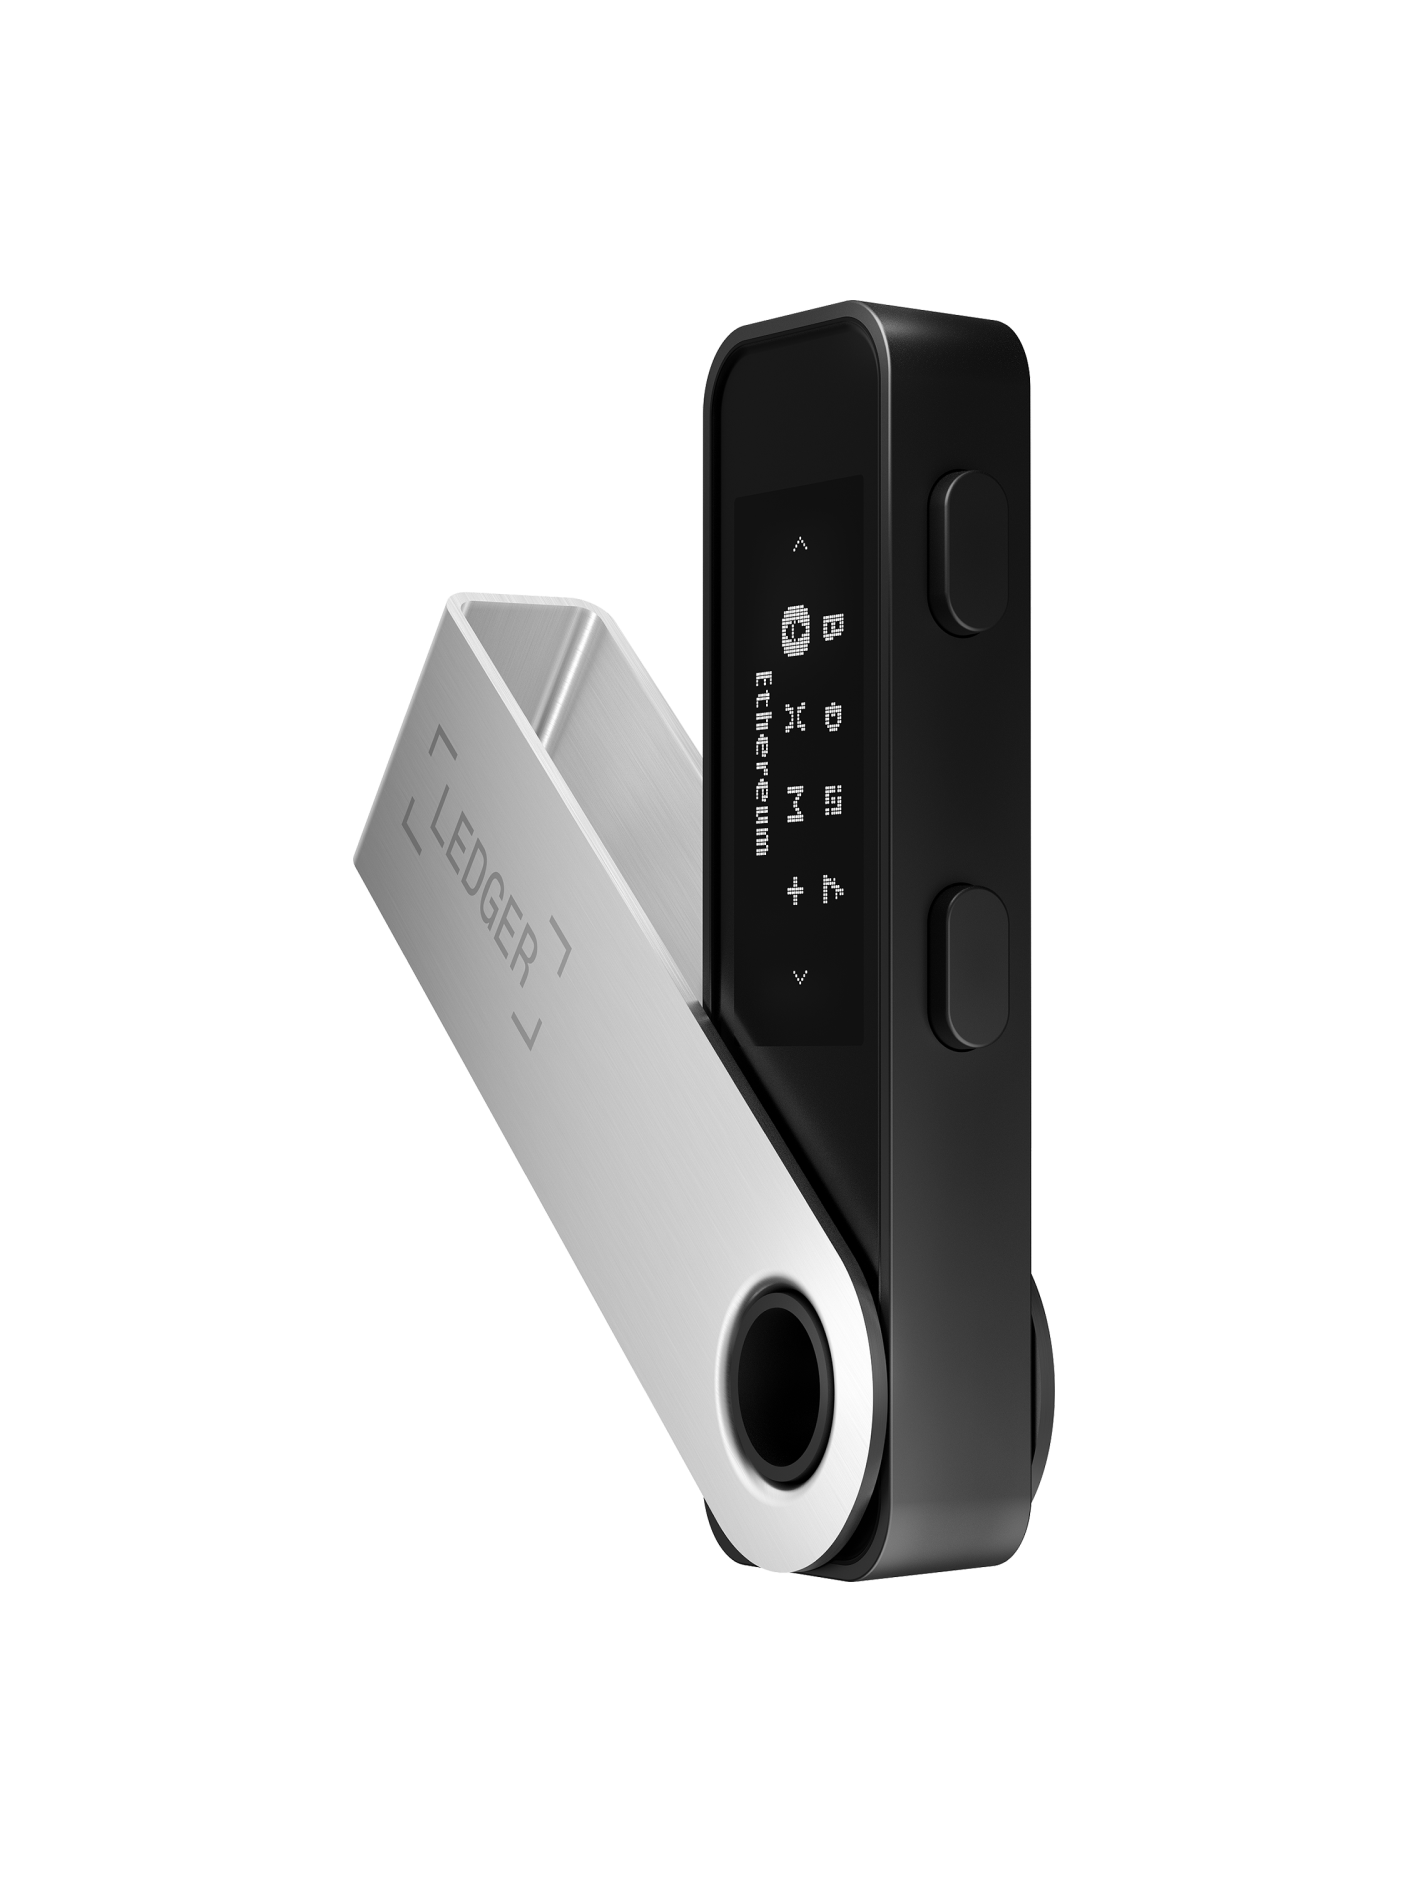  Ledger Nano X Crypto Hardware Wallet - Bluetooth - The Best Way  to securely Buy, Manage and Grow All Your Digital Assets : Electronics